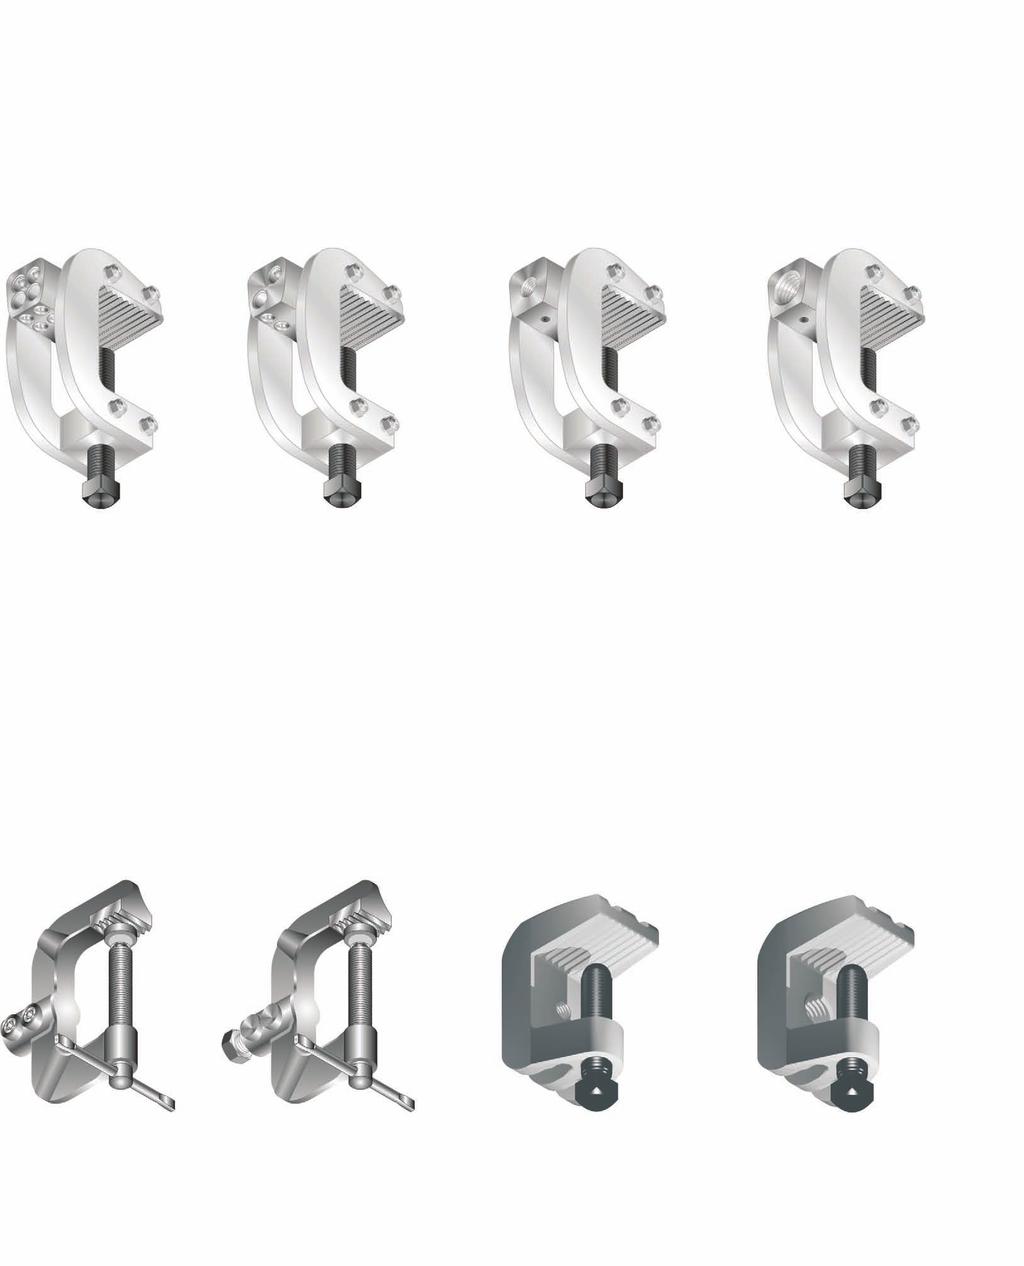 SECTION 300 HEAVY DUTY GROUND CLAMPS Model G /G-1500 Ground Clamps LENCO WELDING ACCESSORIES LTD. Model G Reduce Voltage Drop Model G-50 Model G-1500-34 Apply up to,000 lbs.